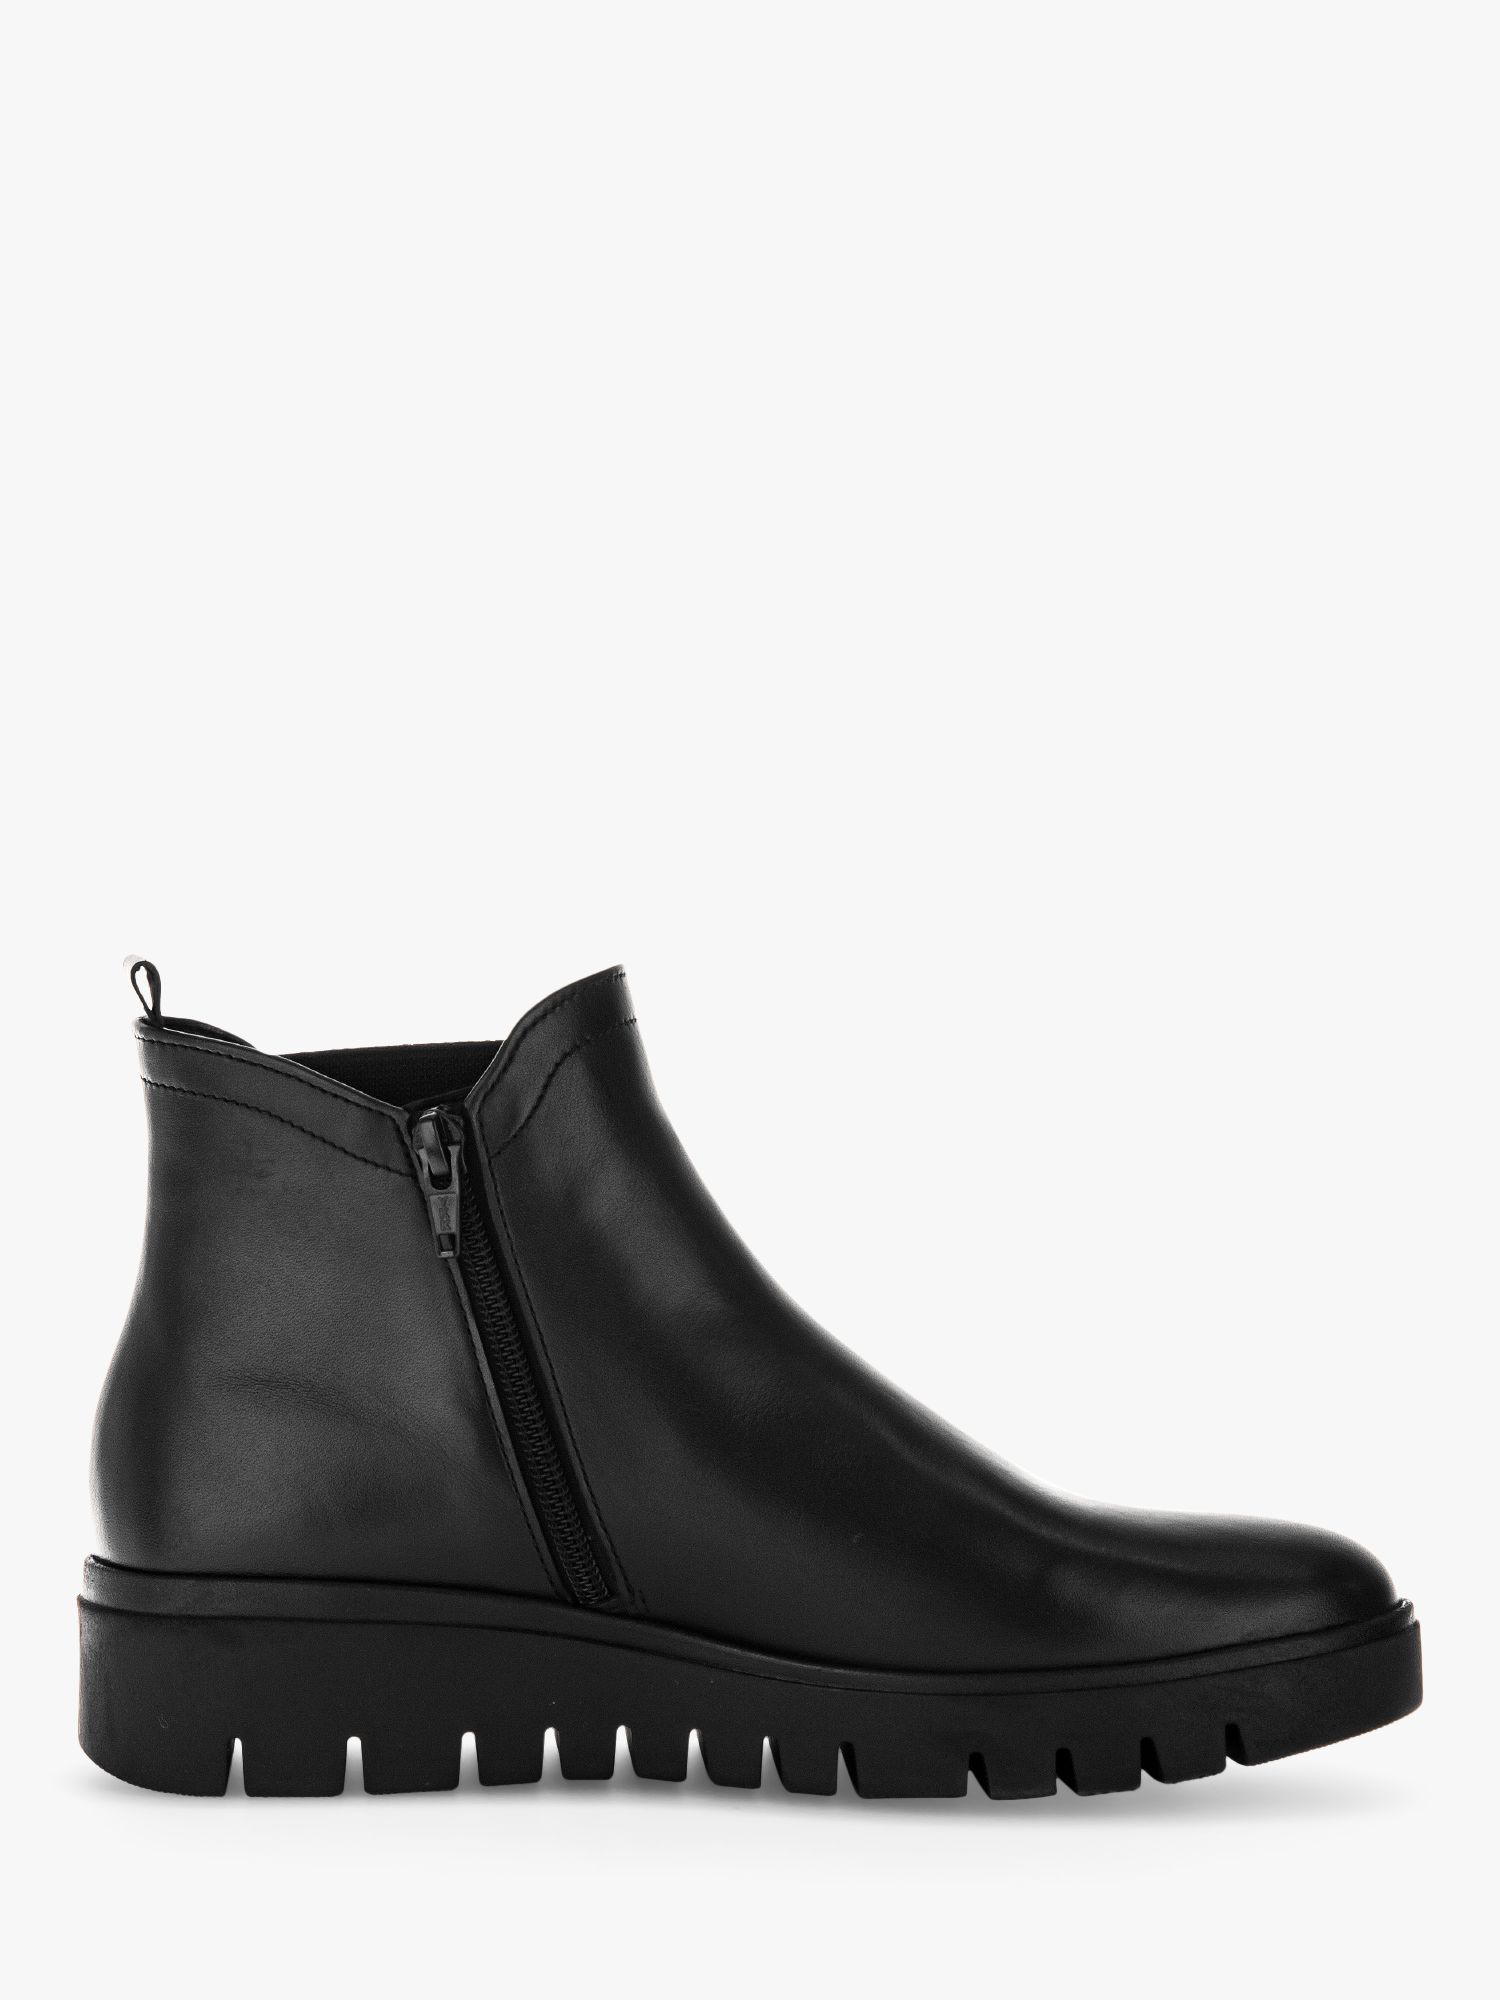 Gabor Dublin Wide Fit Leather Chelsea Boots, Black